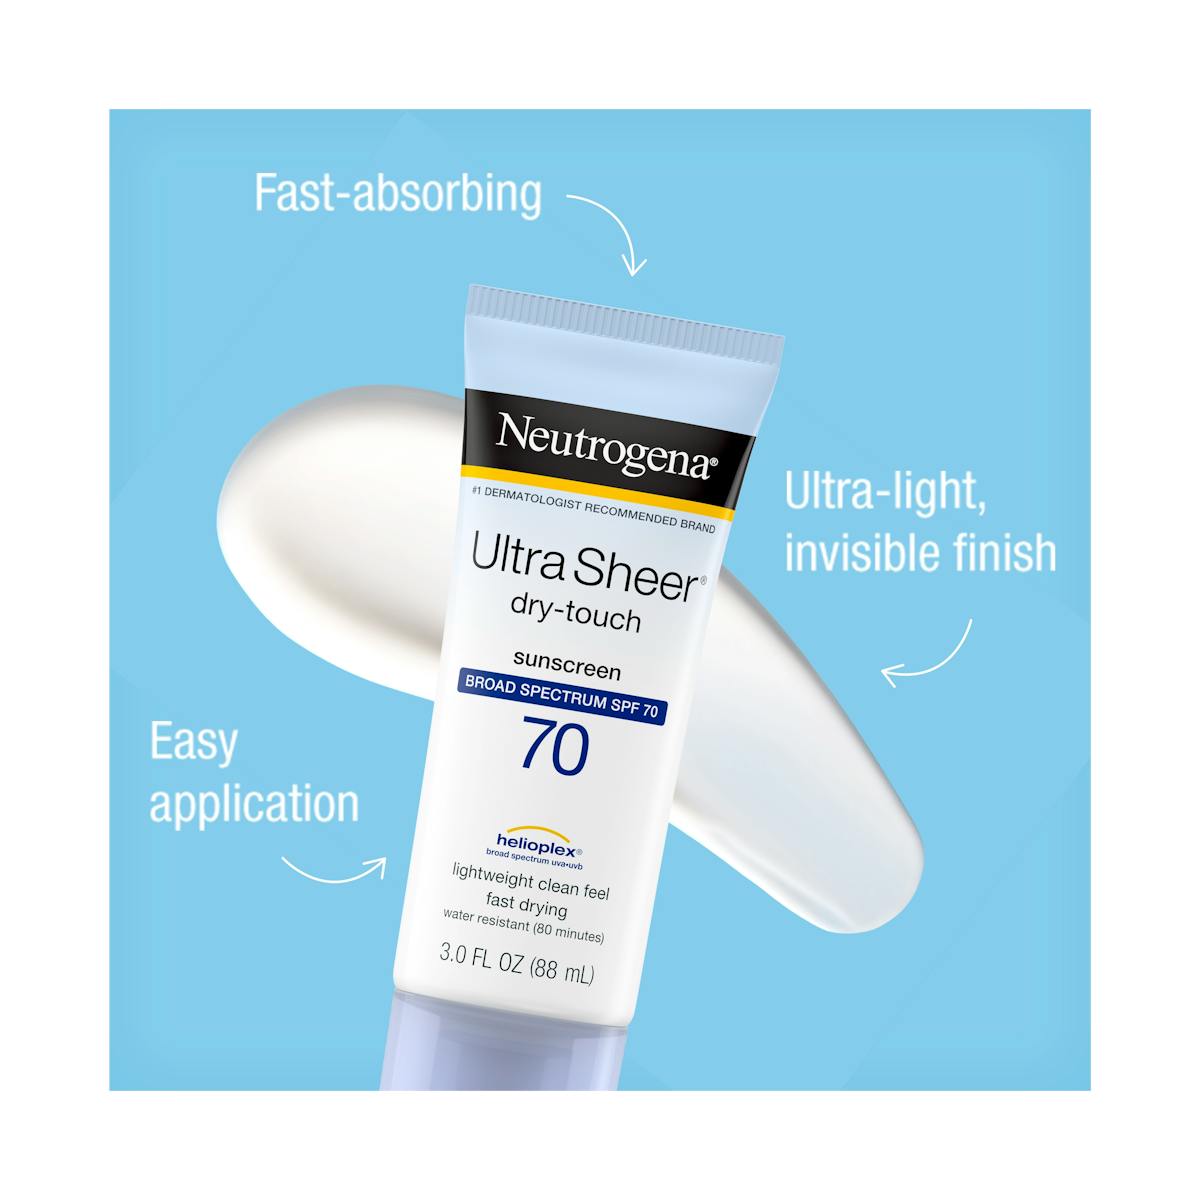 Neutrogena Ultra Sheer Dry-Touch Sunscreen Lotion SPF 55 - 3oz for sale  online